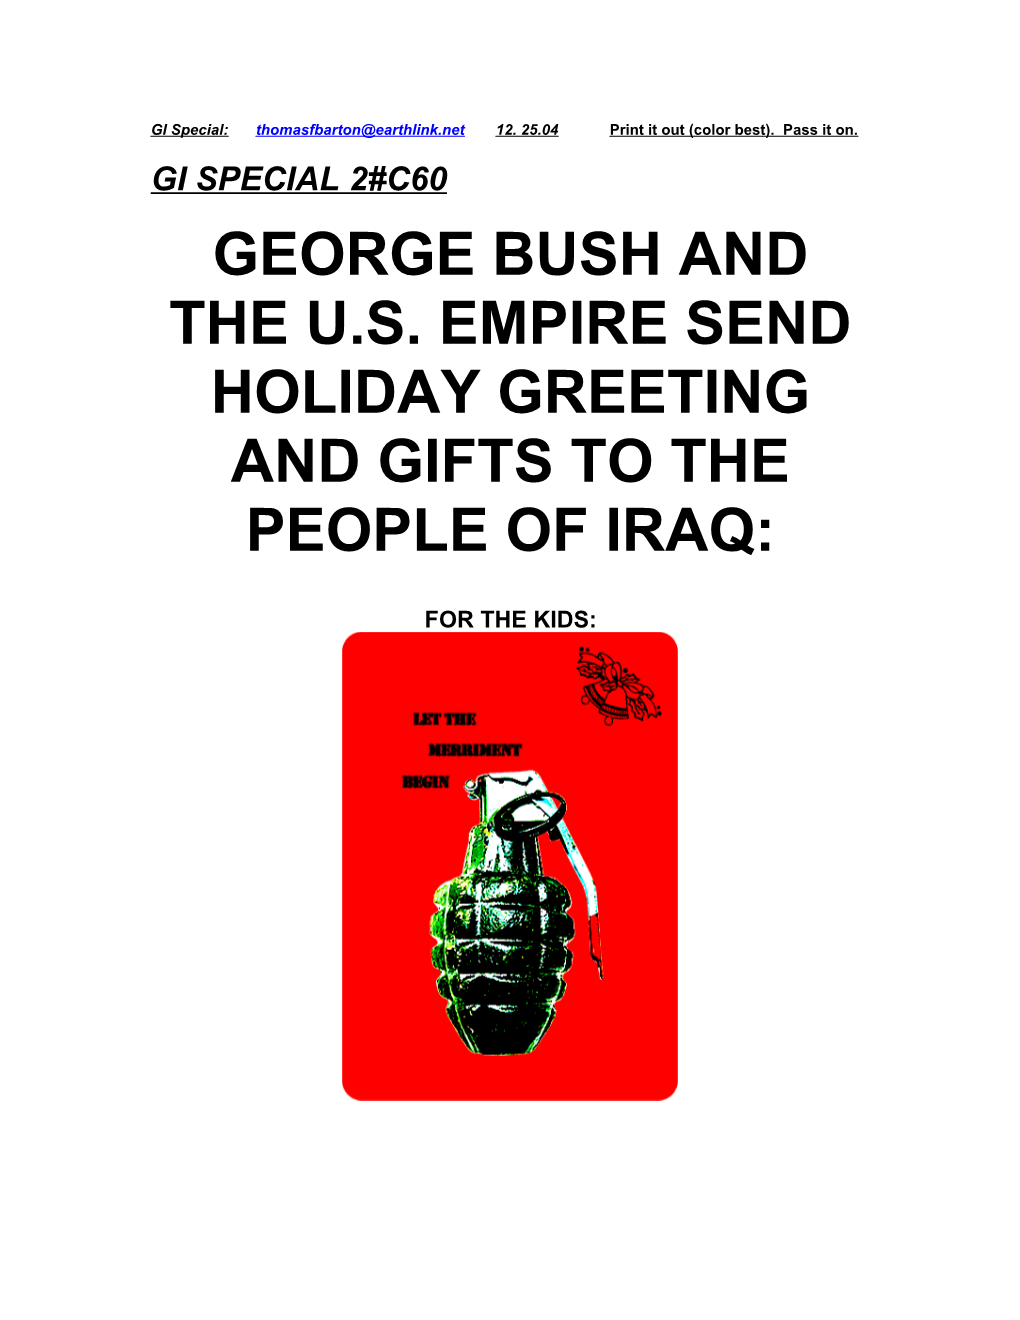 George Bush and the U.S. Empire Send Holiday Greeting and Gifts to the People of Iraq